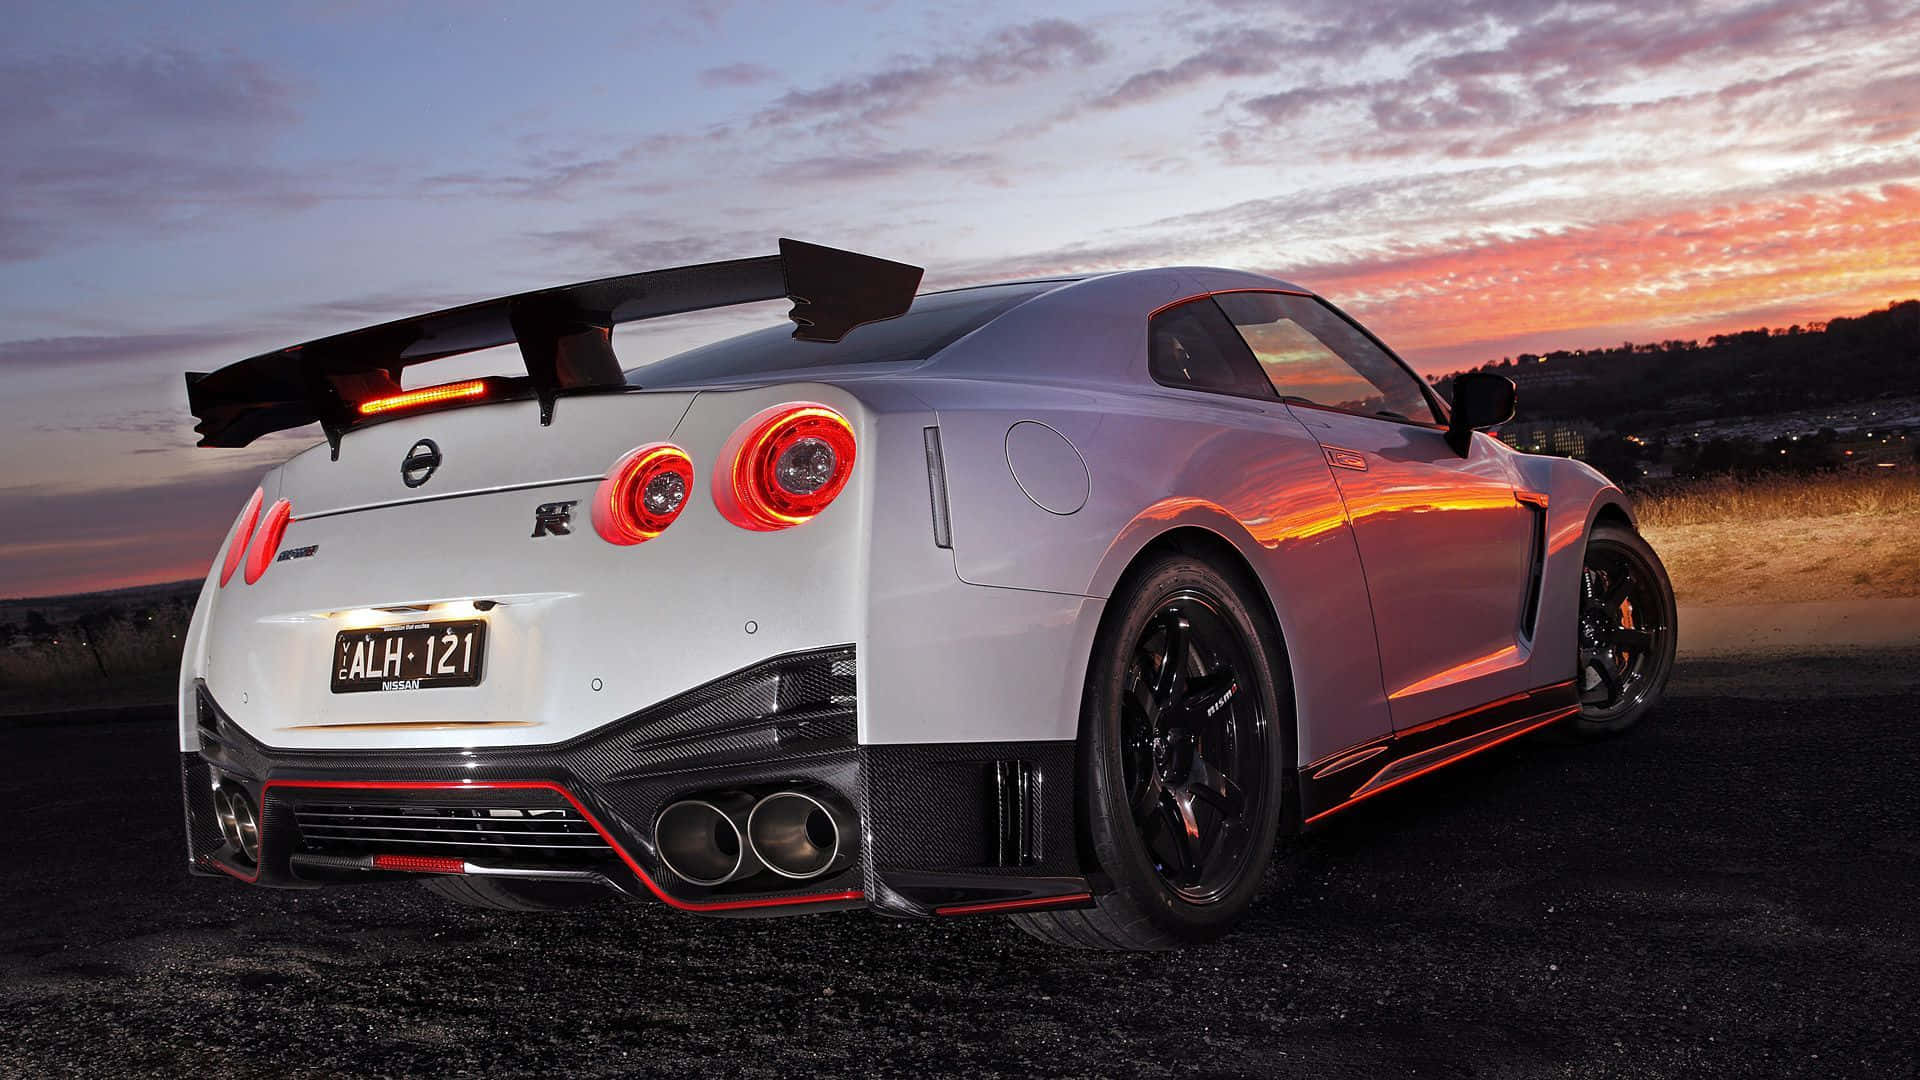 The Fast And The Furious: Gtr R35 Background